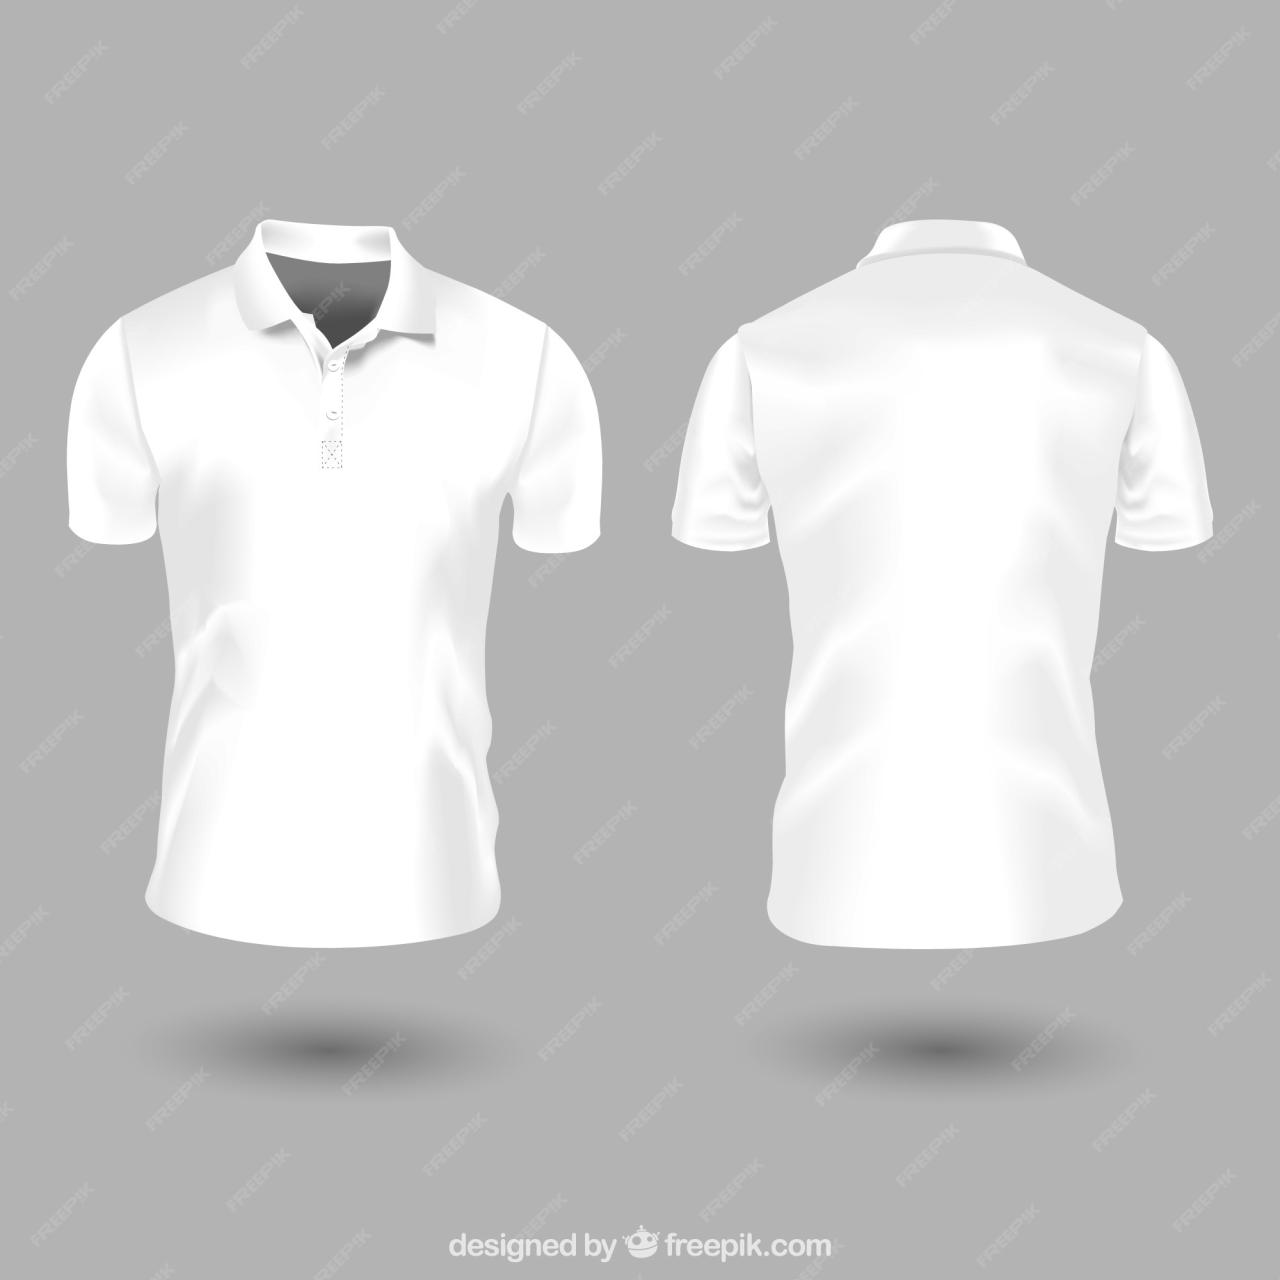 White Polo Shirt Template For Photoshop